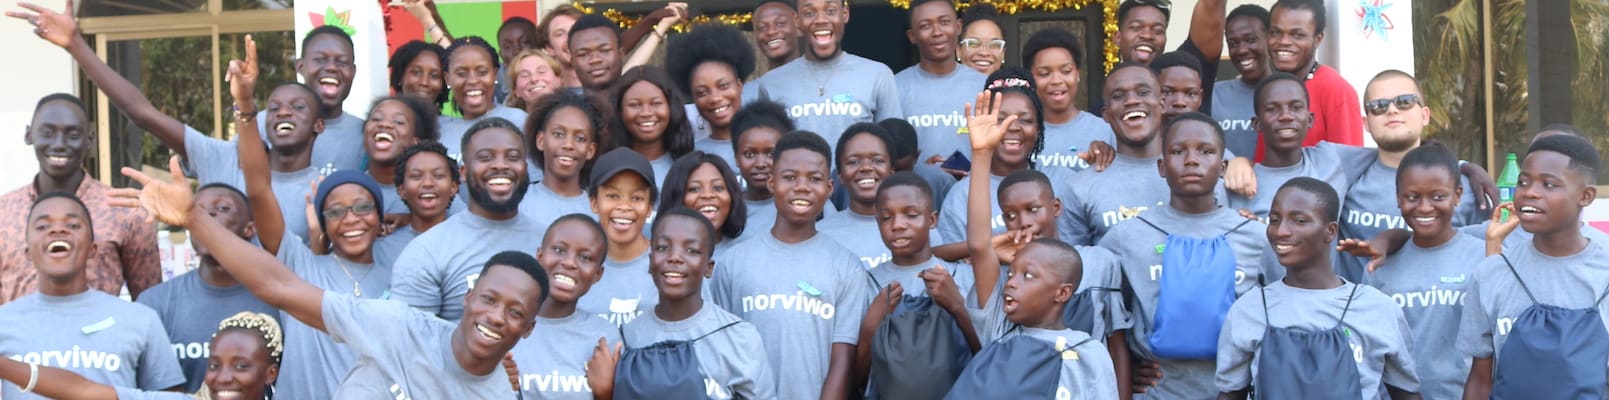 About Future of Africa, assisting homeless youth in Ghana